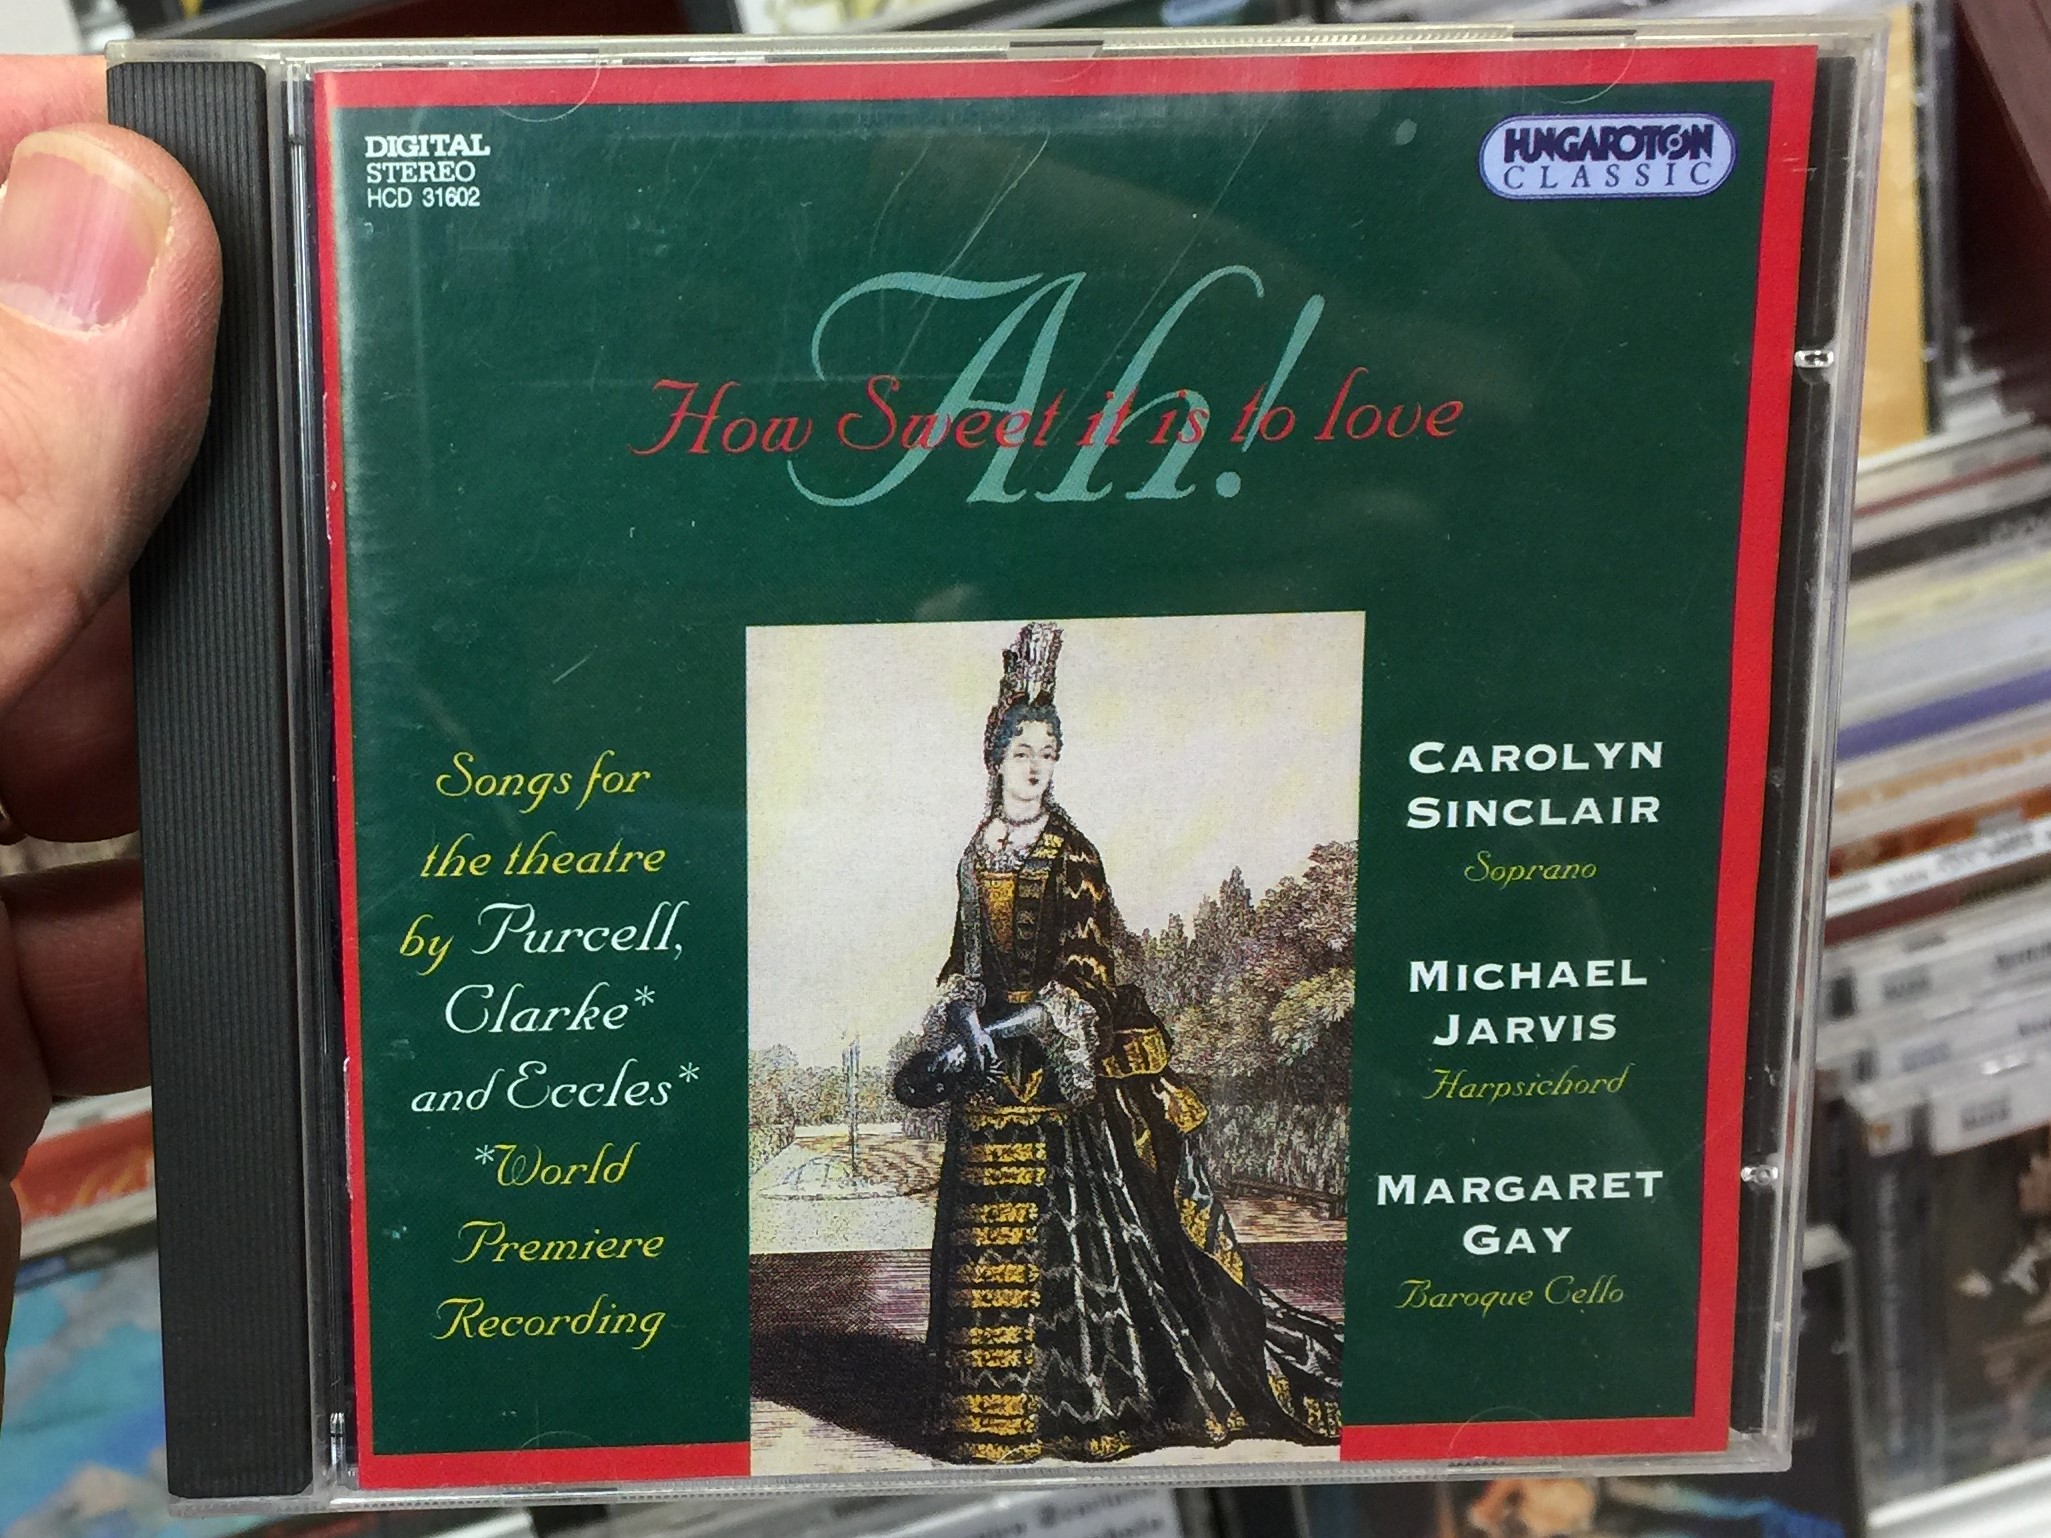 ah-how-sweet-it-is-to-love-songs-for-the-theatre-by-purcell-clarke-and-eccles-world-premiere-recording-carolyn-sinclair-soprano-michael-jarvis-harpsichord-hungaroton-classic-audio-cd-1-1-.jpg